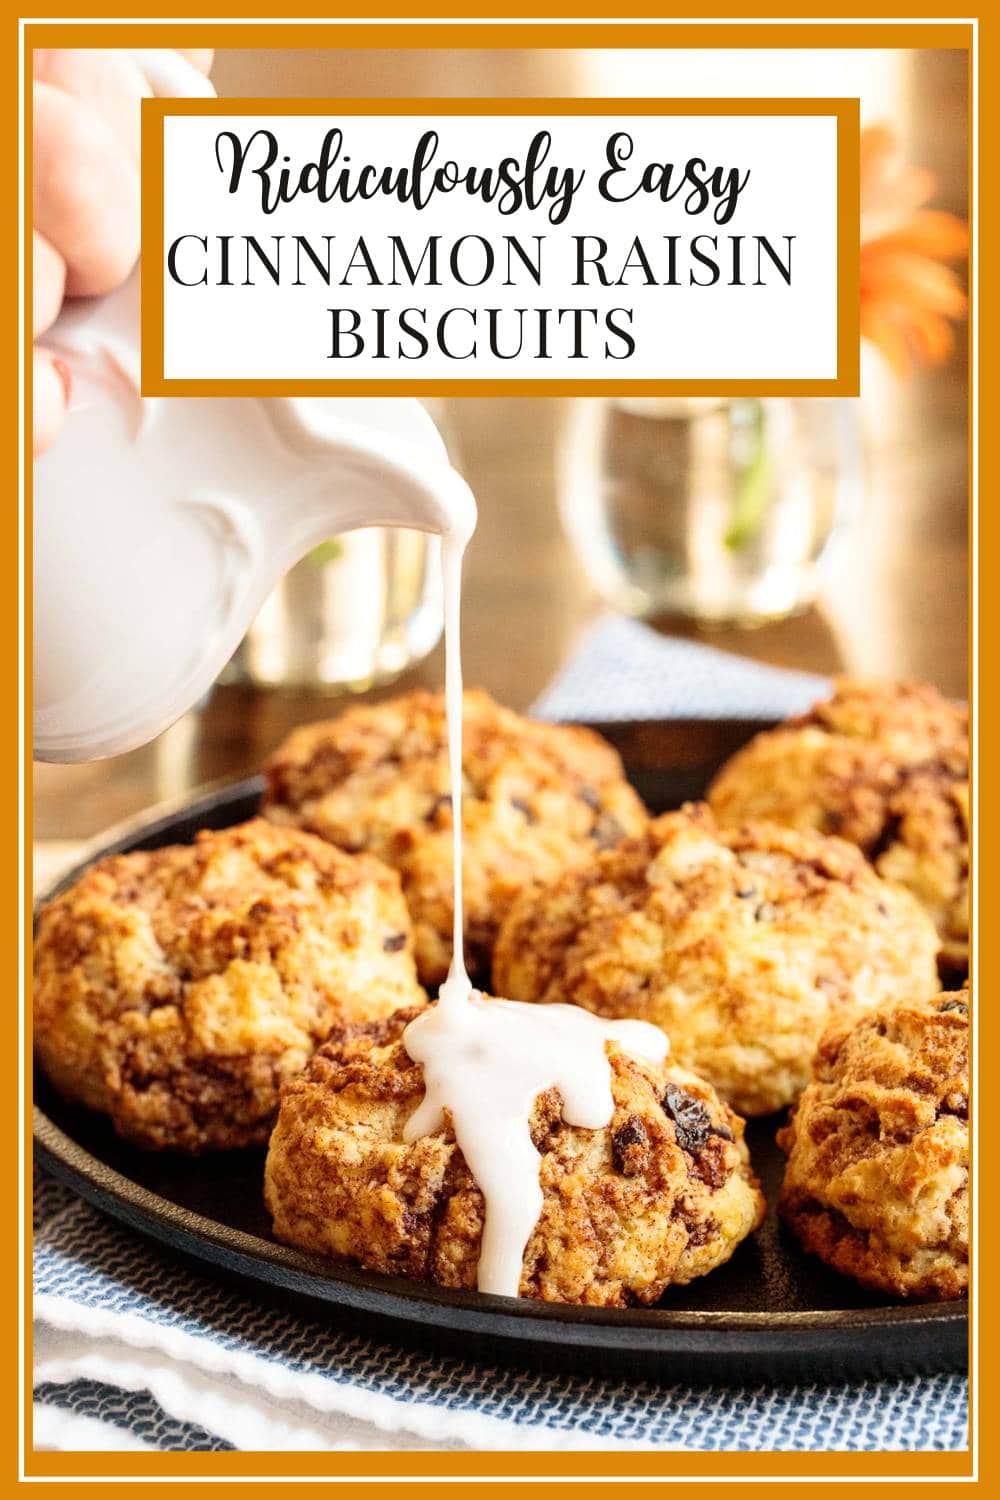 Ridiculously Easy Cinnamon Raisin Biscuits